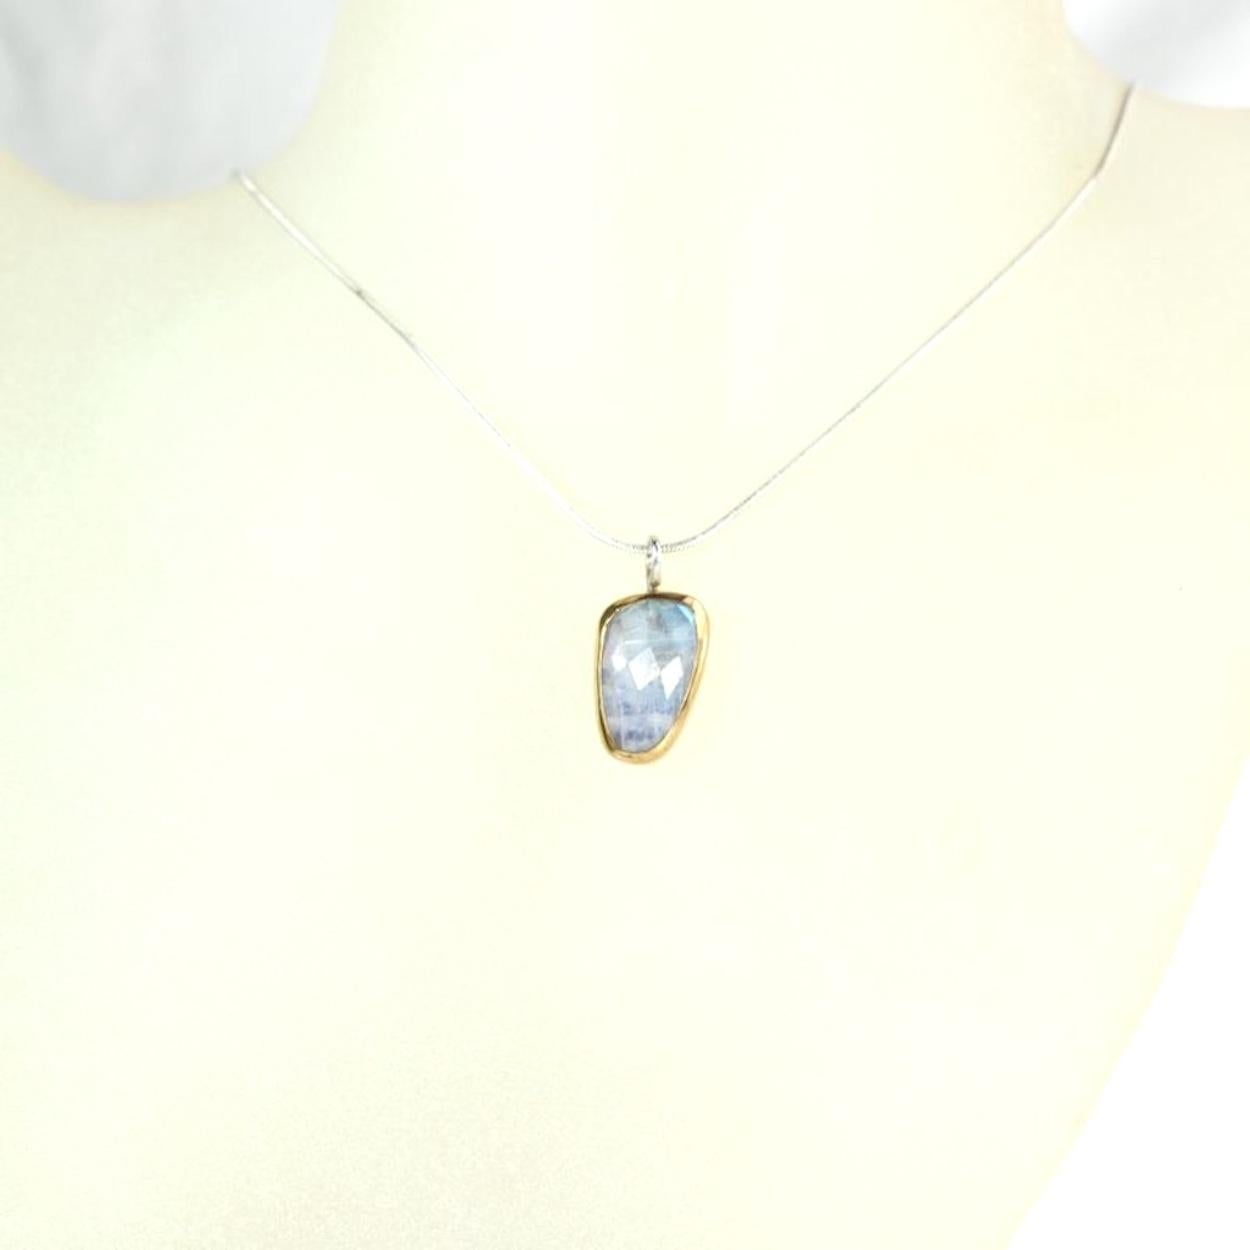 Rose cut rainbow moonstone pendant, handset in a 22K gold bezel with a solid sterling silver back. The back of the bezel plate is oxidized to give this stone a moody, mysterious glow. Sterling silver wirework. This pendant includes a 18″ sterling